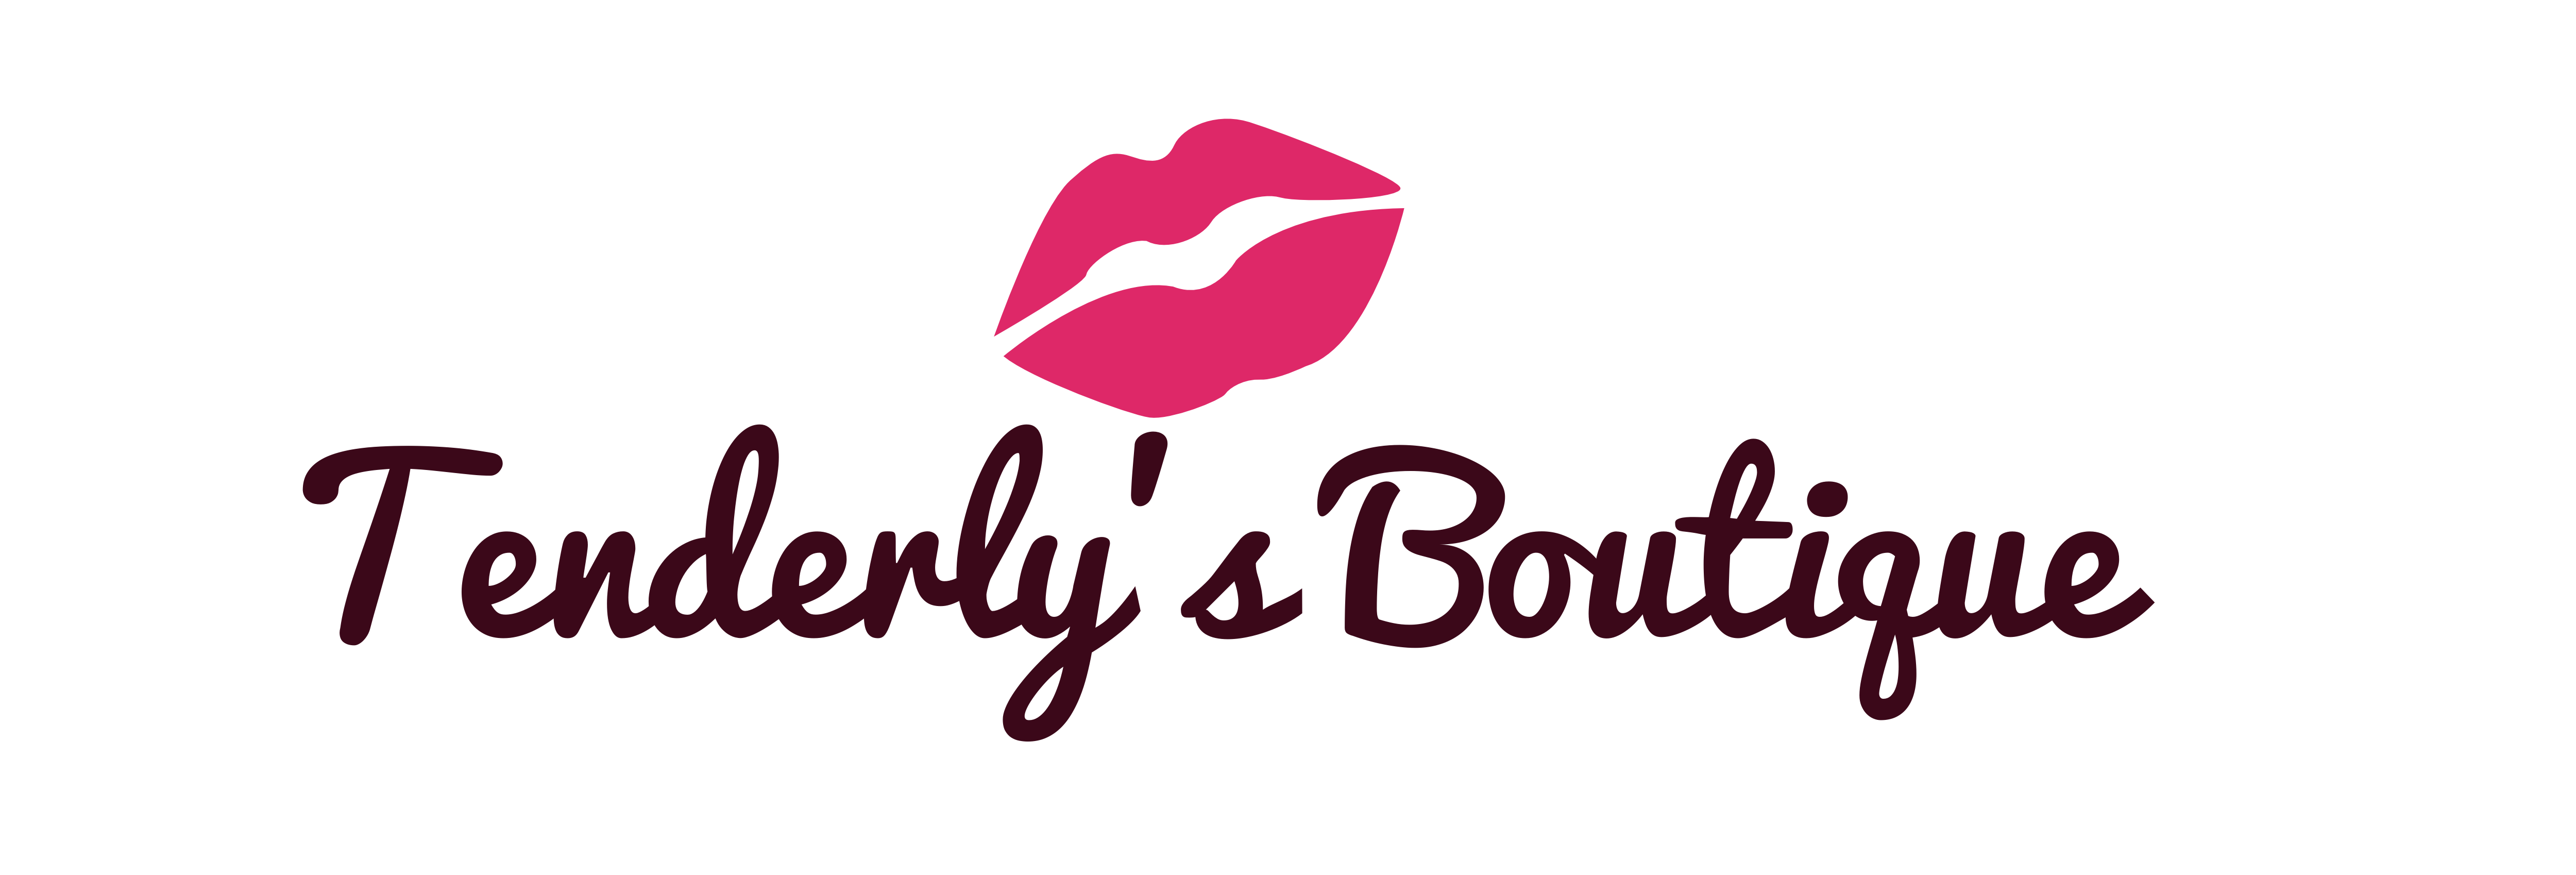 Tenderly's Boutique